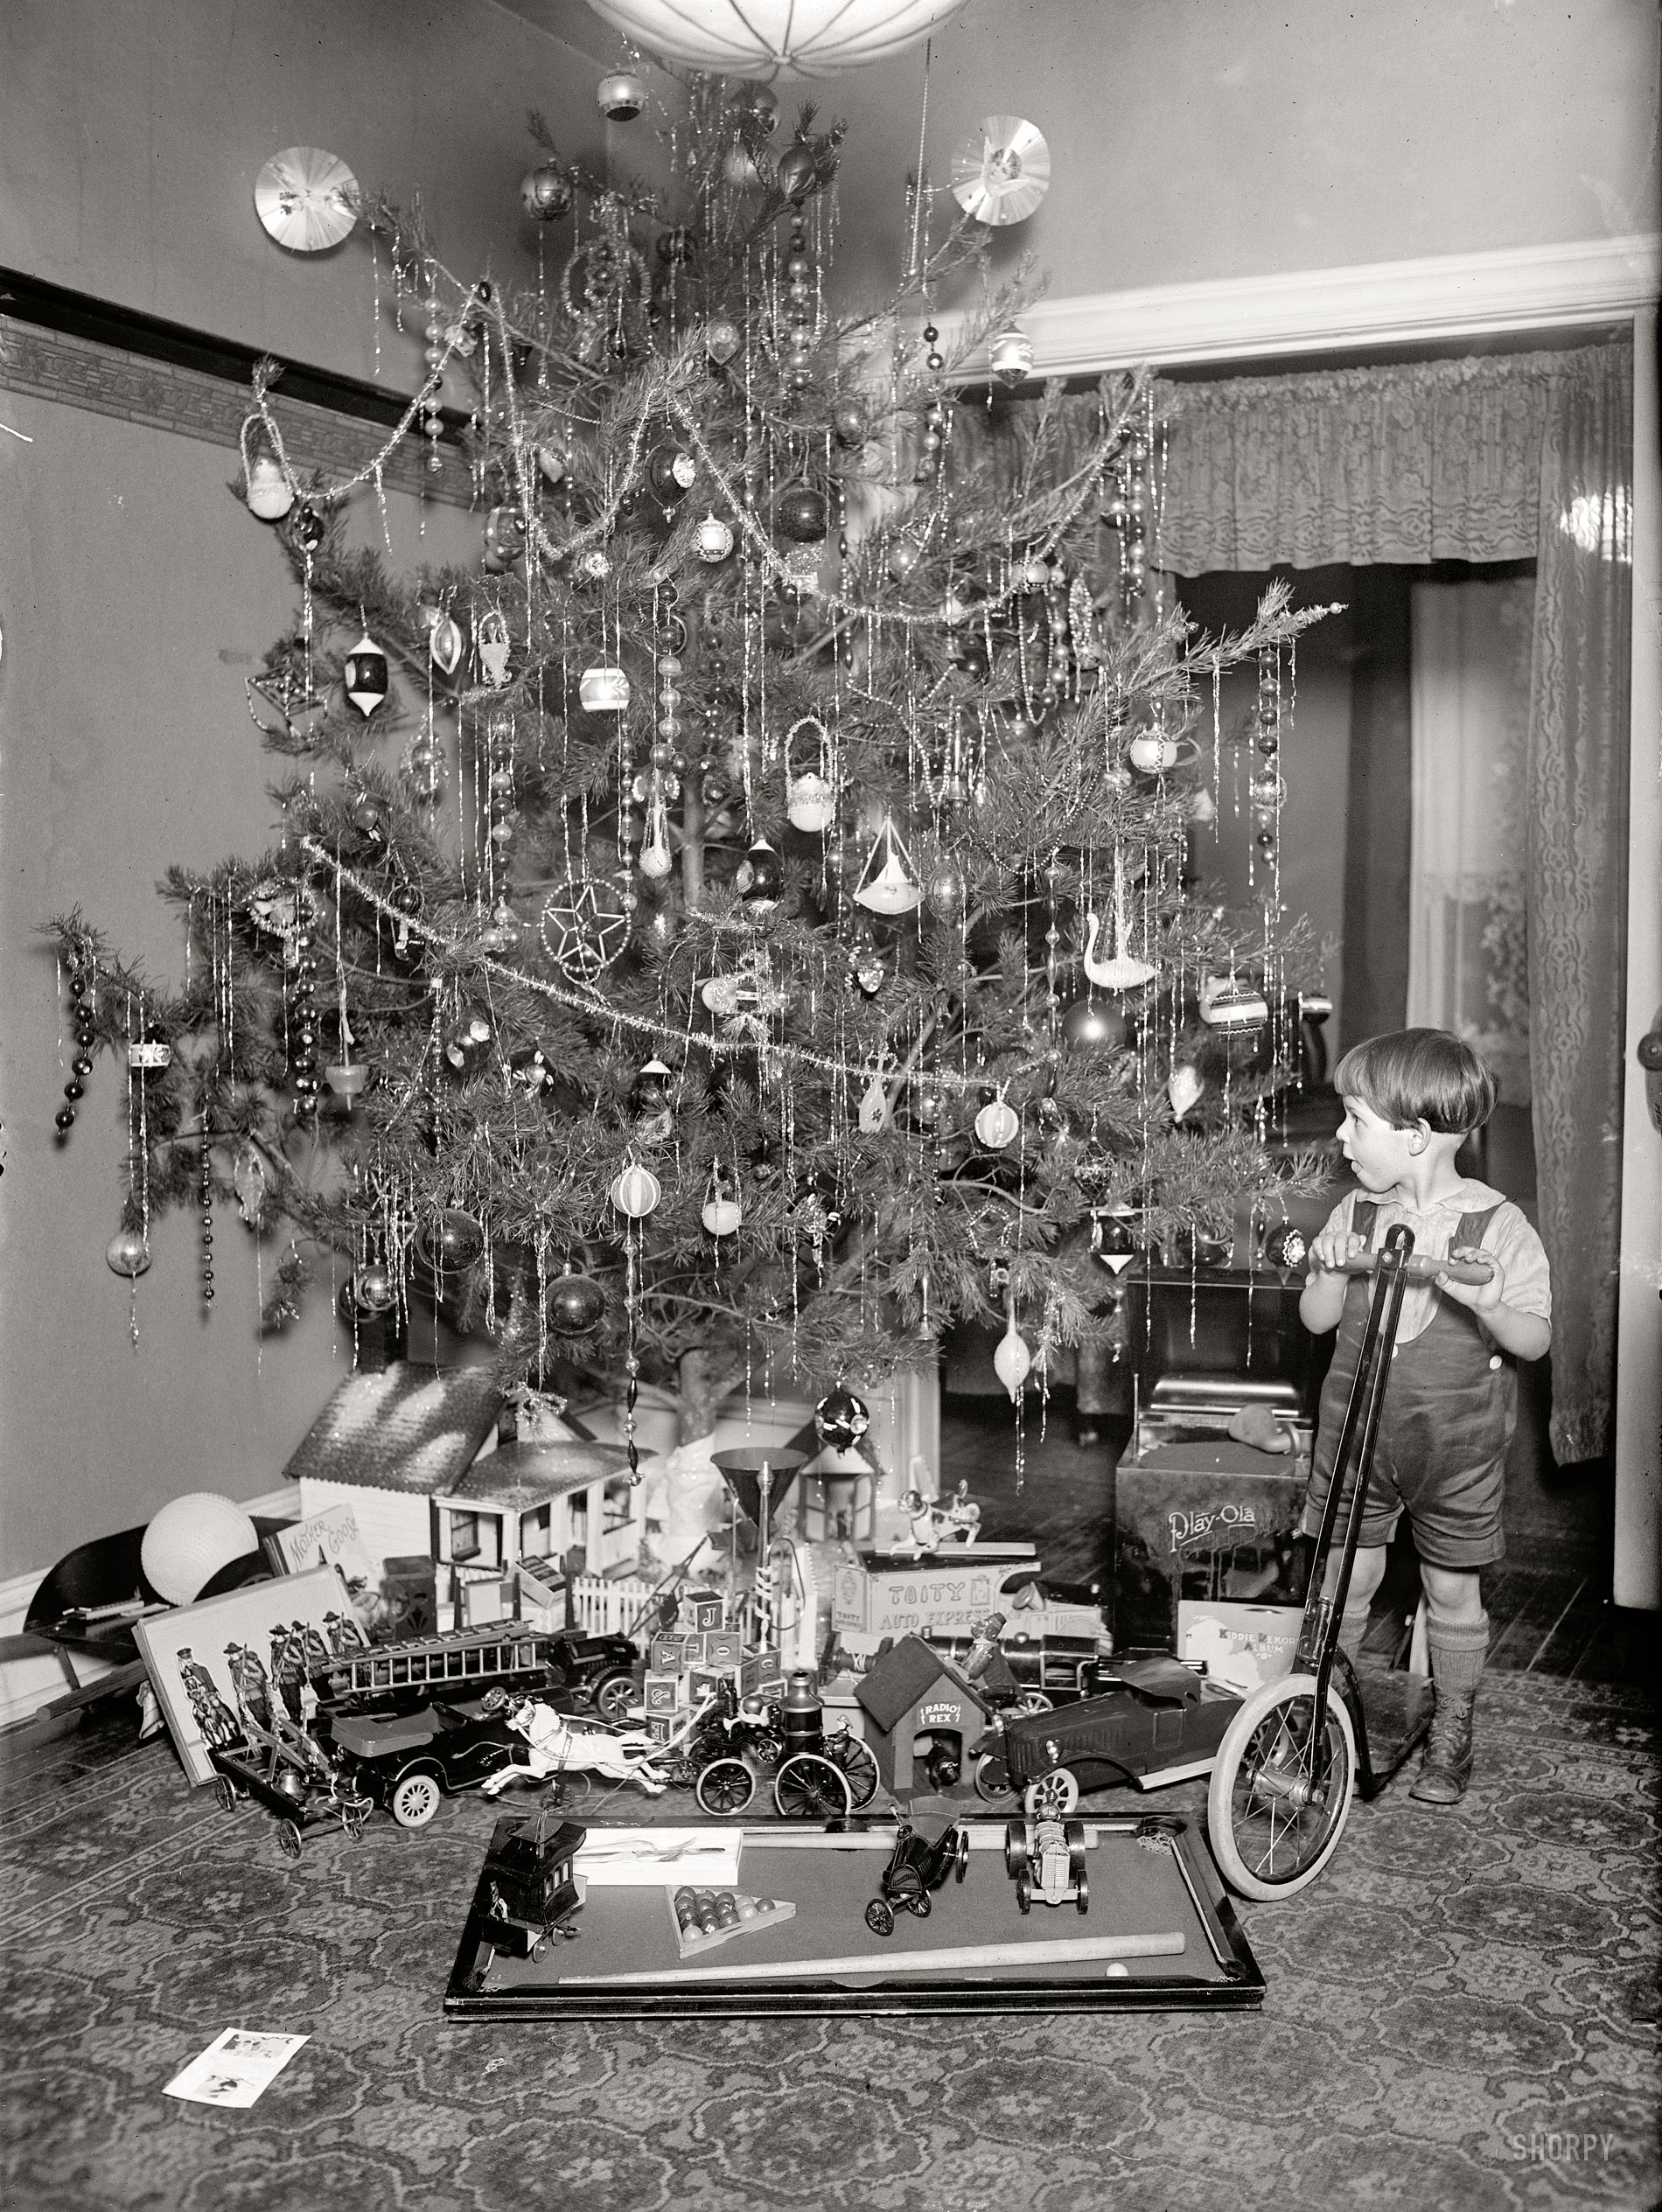 "Dorsey Christmas tree, 1922." Merry Christmas to all from Shorpy! National Photo Company Collection glass negative. View full size.